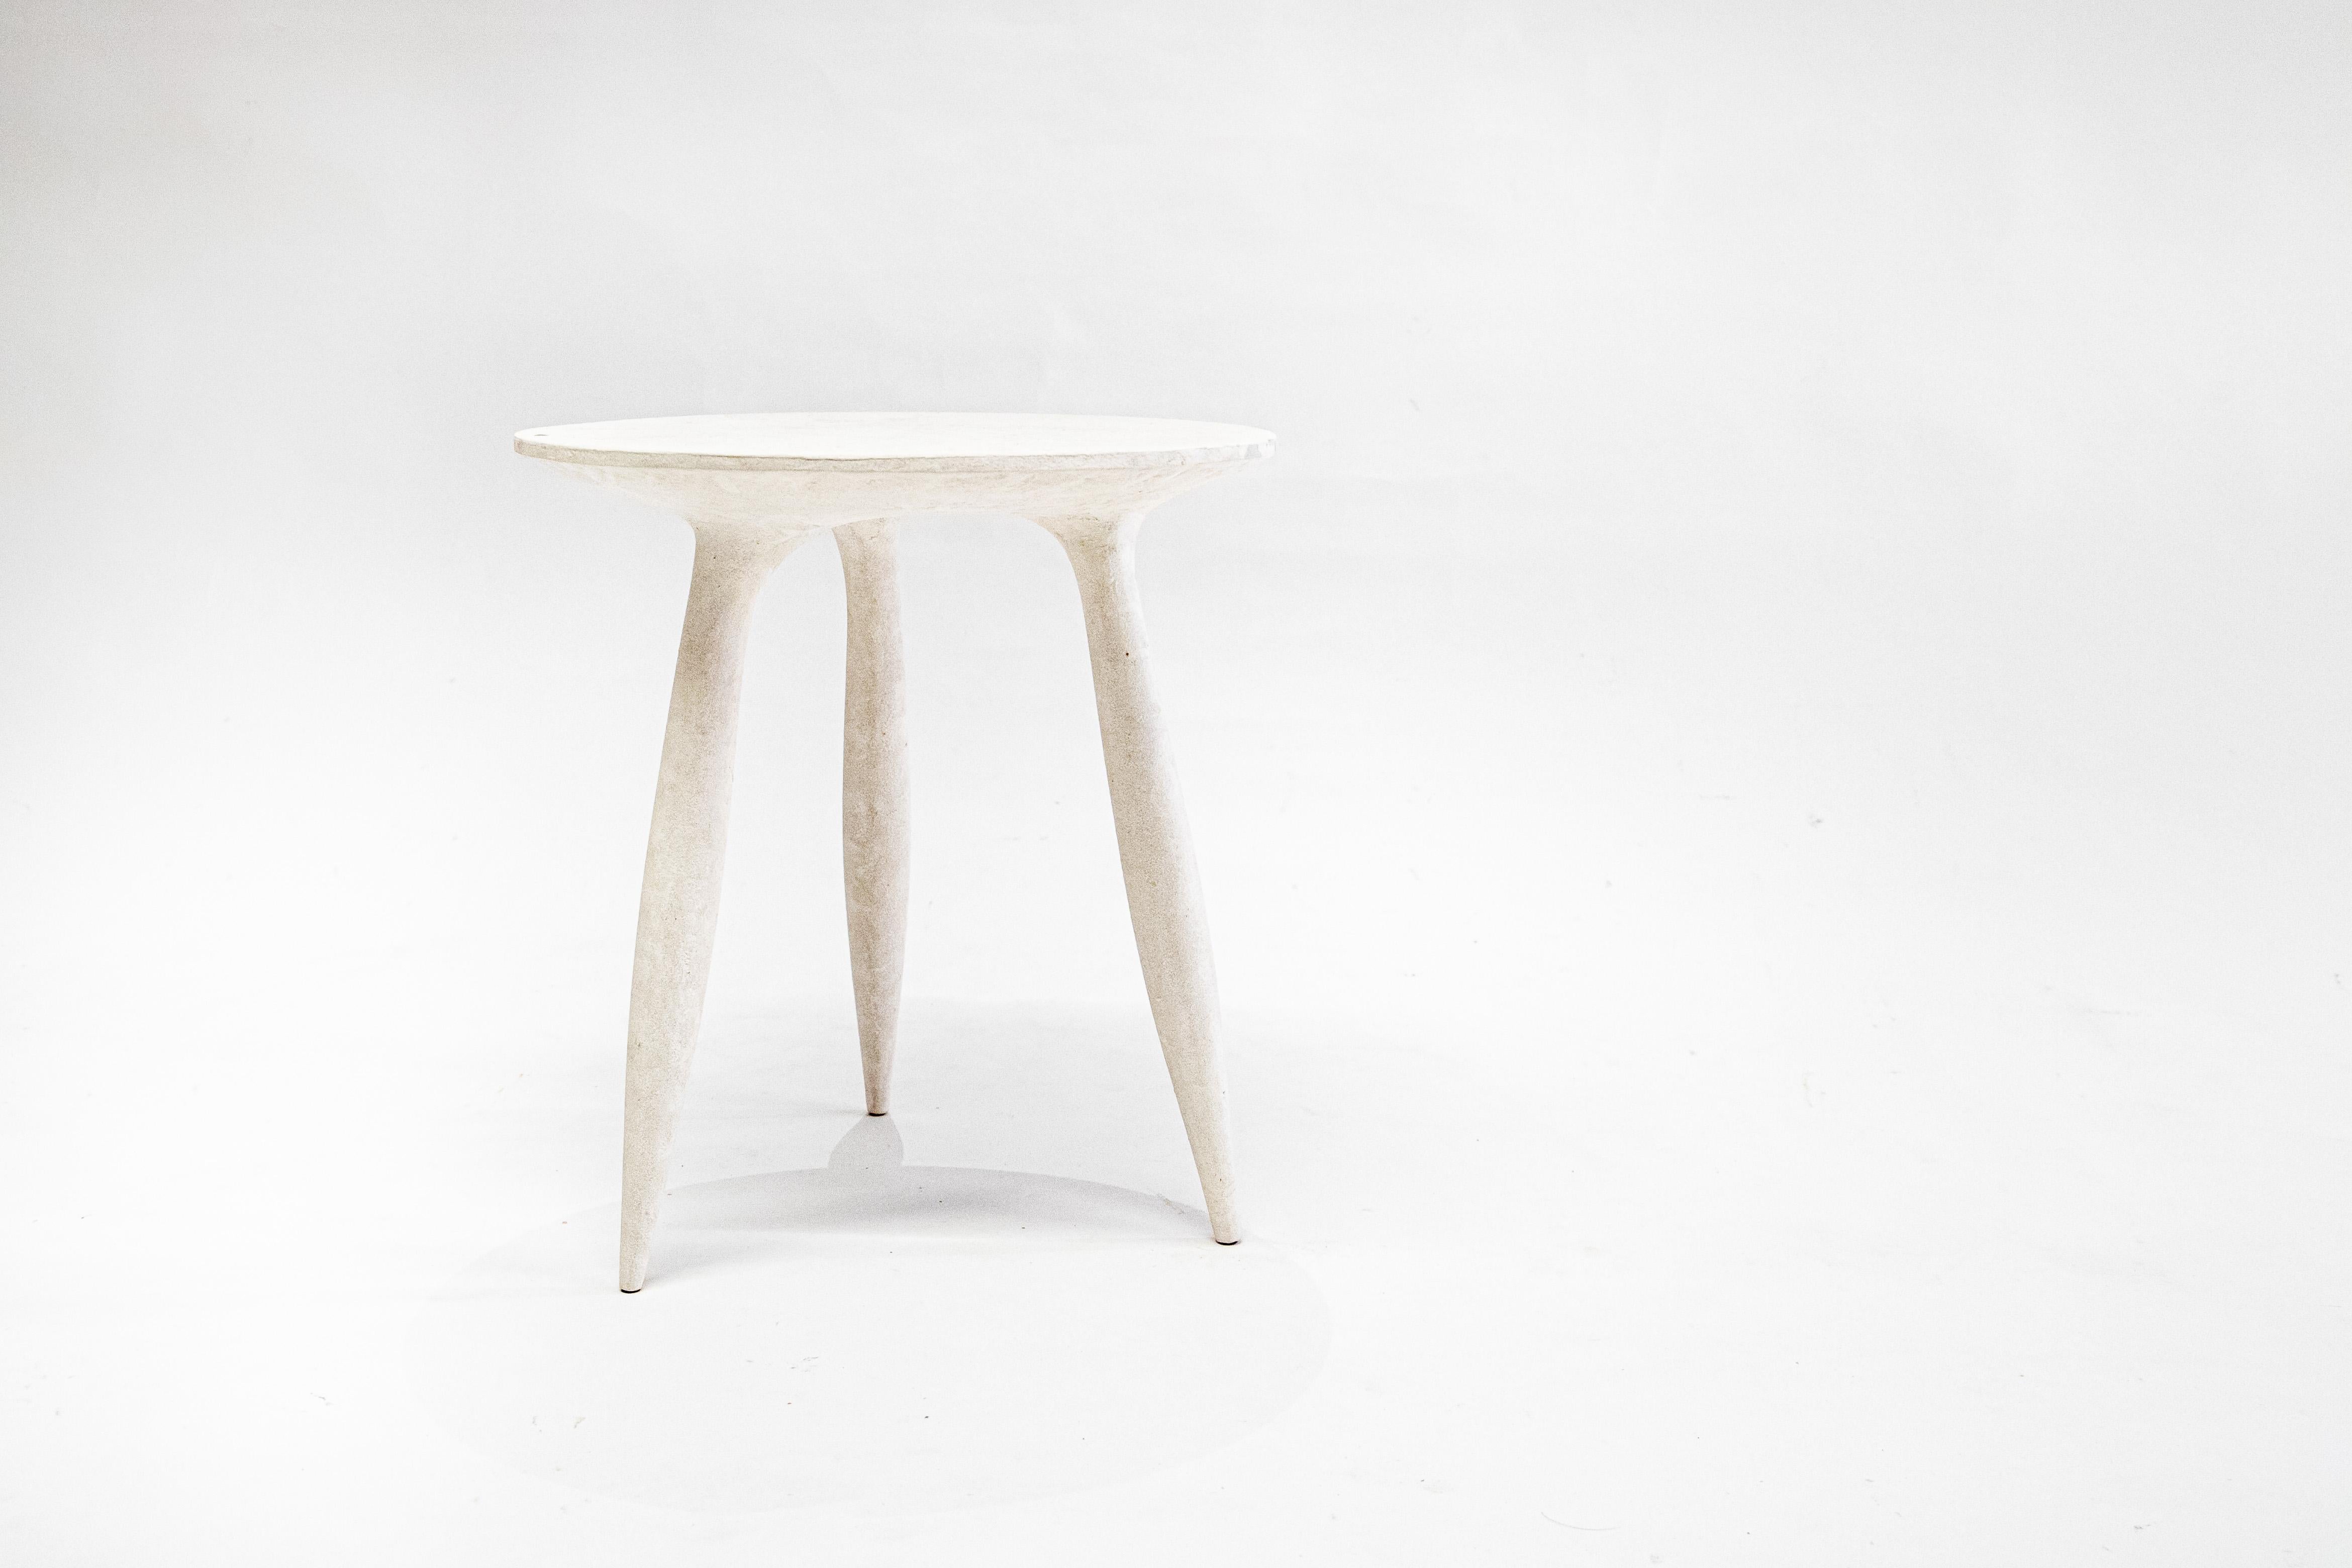 Sycamore BTRFL aside stool by Cedric Breisacher
Dimensions: D 38 x H 45 cm
Materials: Sycamore wood, moon white finish



Stool or occasional table, the BTRFL is a piece in the line
minimal. In a way, it takes up the assemblies of the